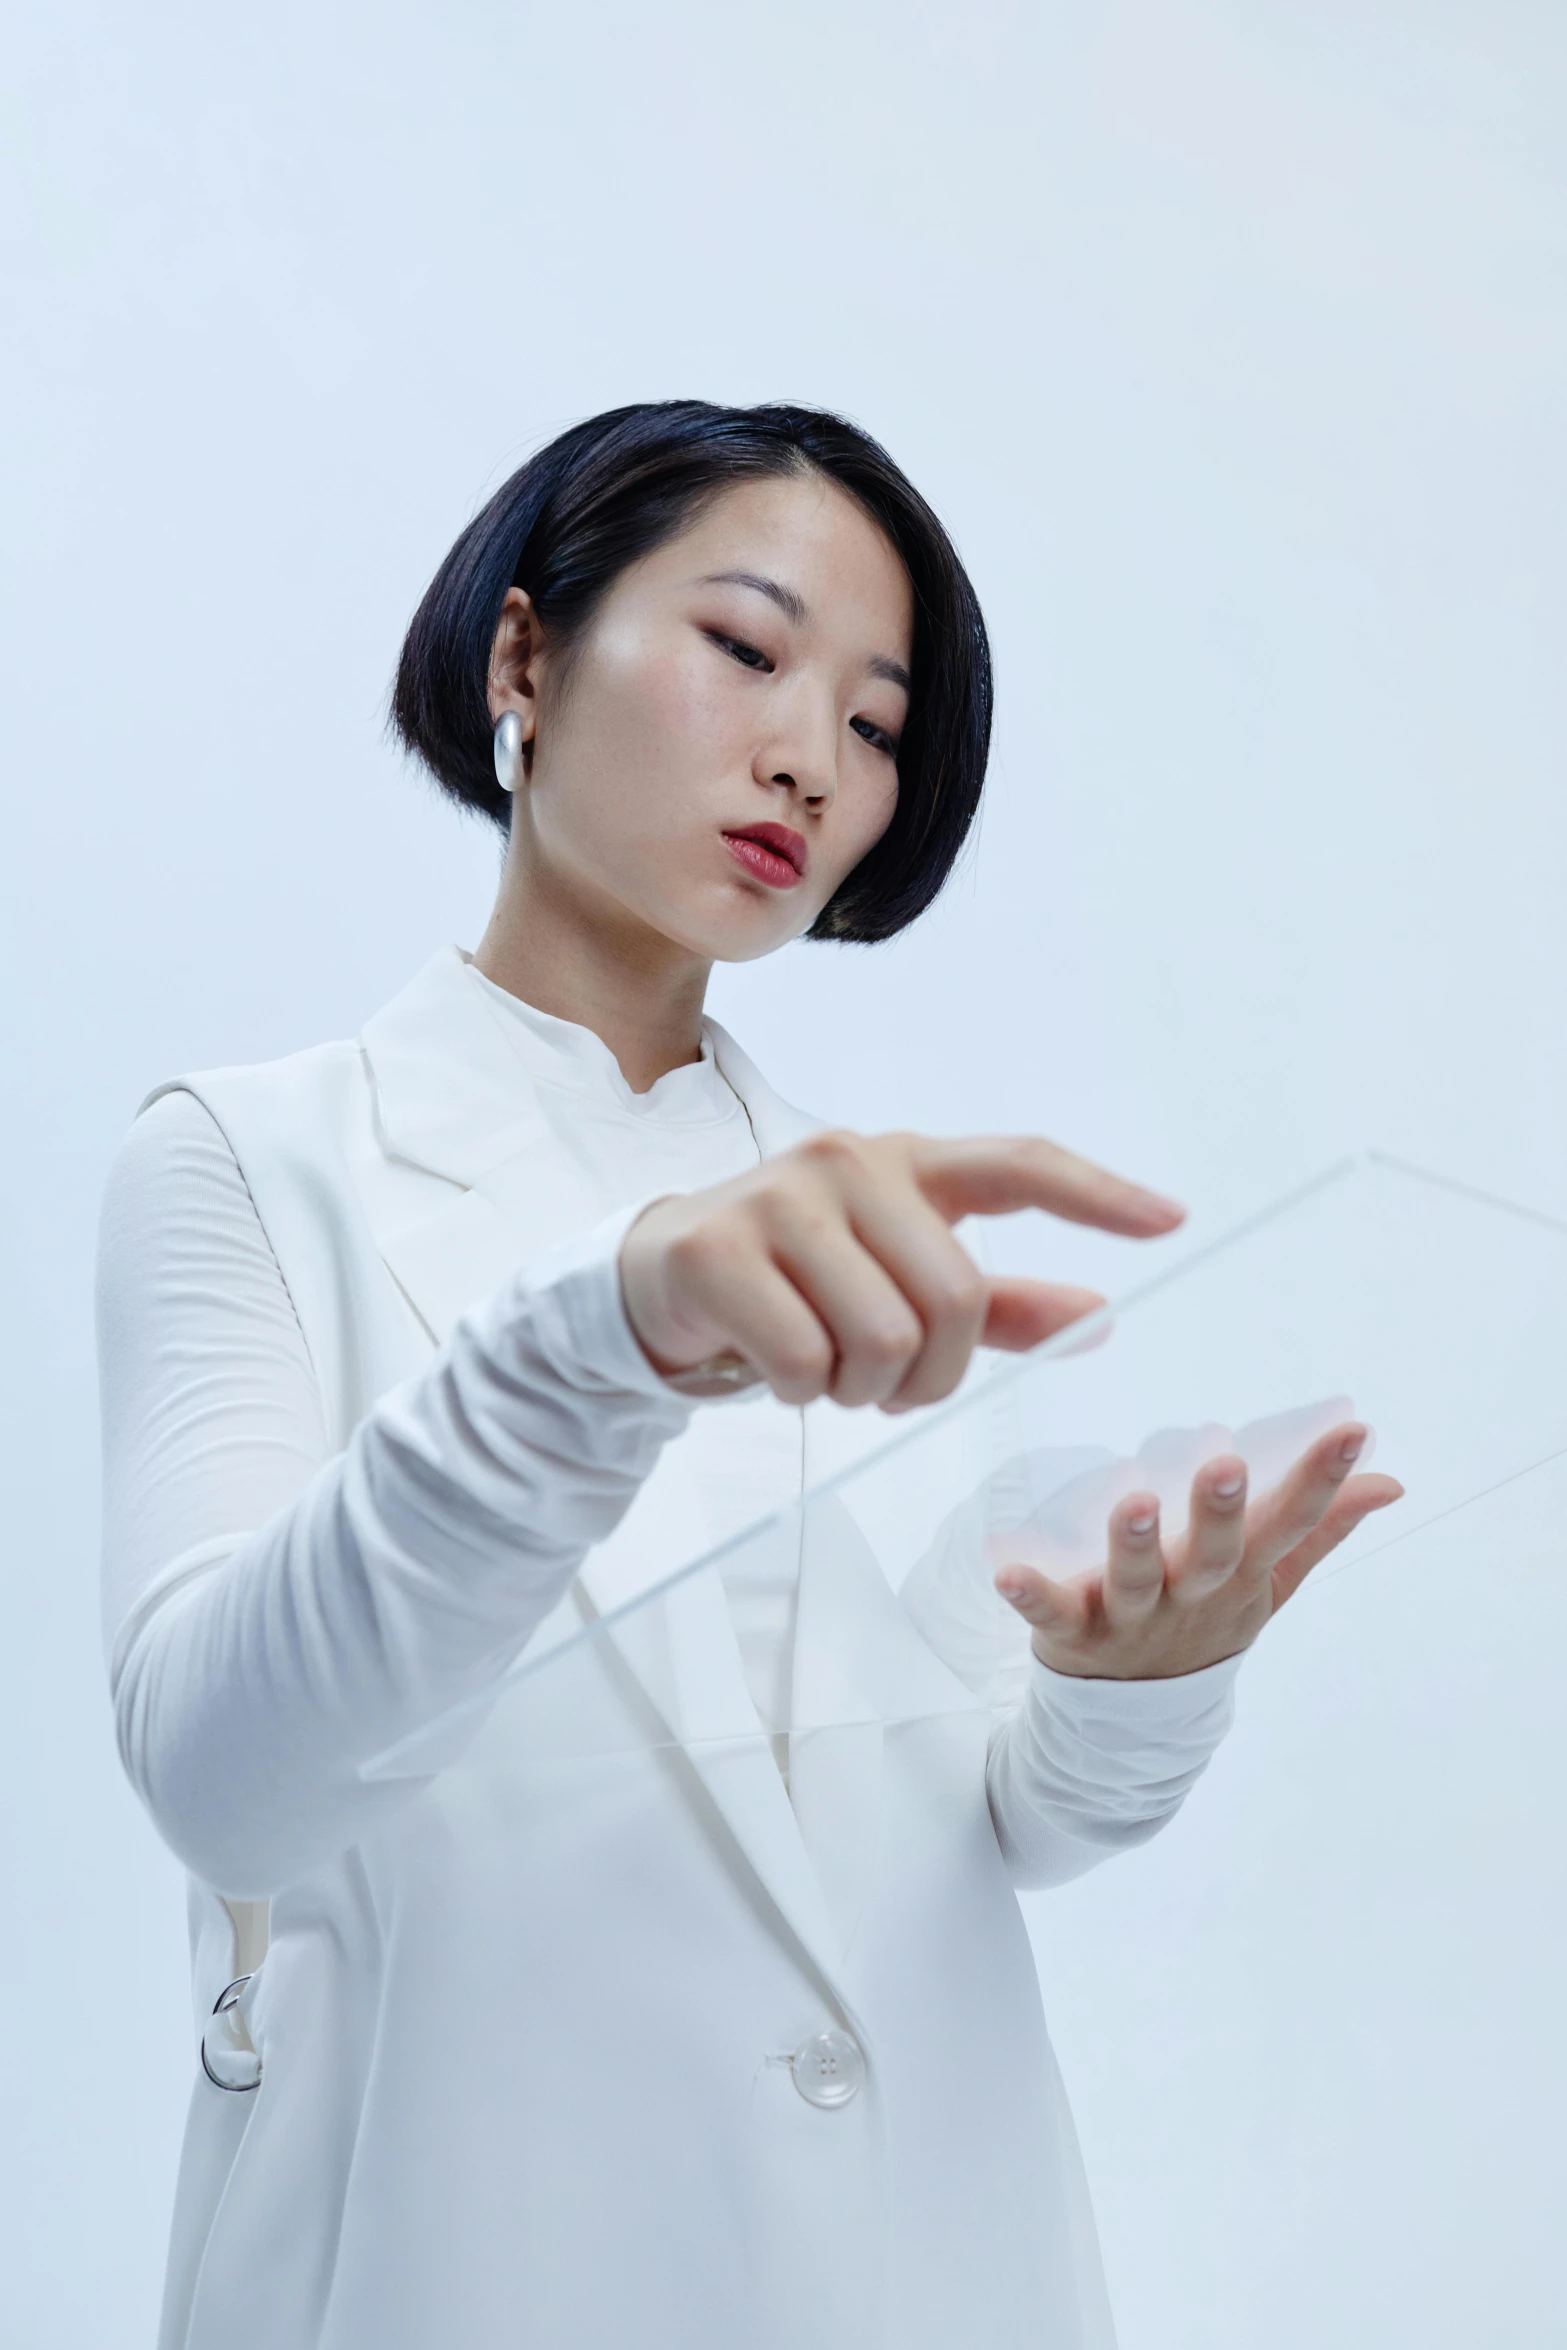 a woman in a white shirt holding a cell phone, an album cover, inspired by Fei Danxu, conceptual art, transparent glass surfaces, modular graphene, partially cupping her hands, looking left